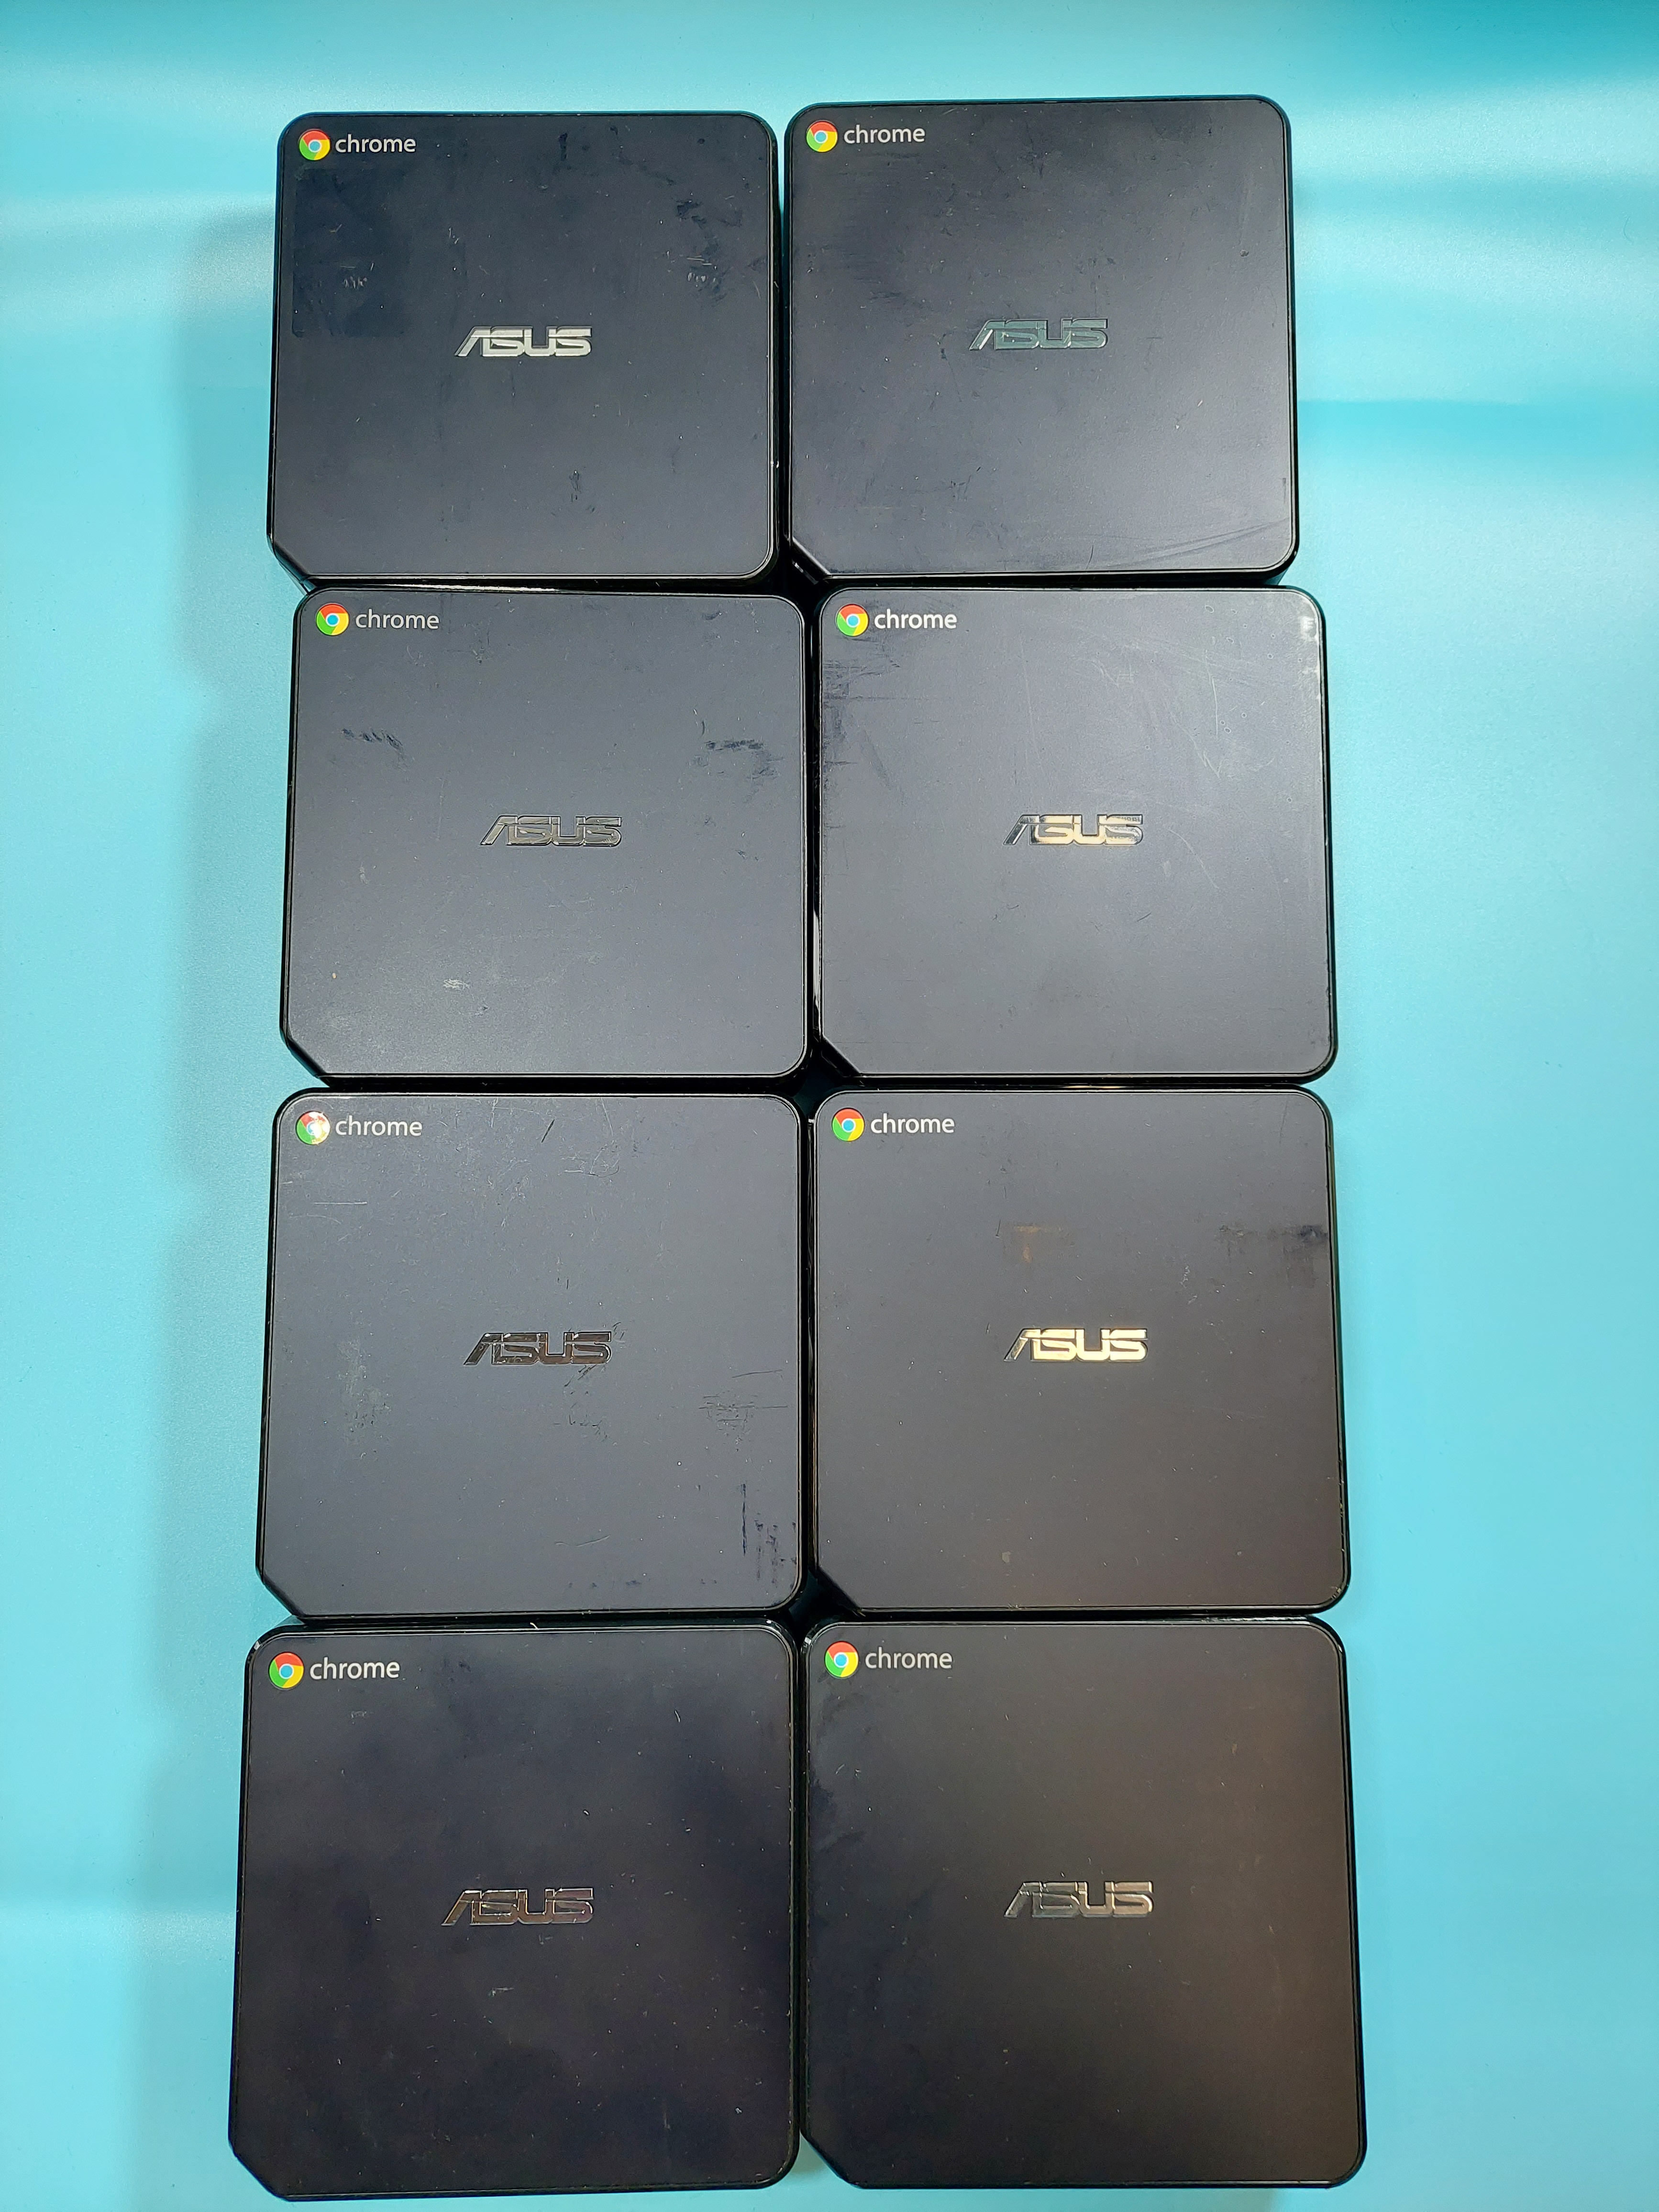 WTS - ASUS Chromebox Lot (456 in stock)